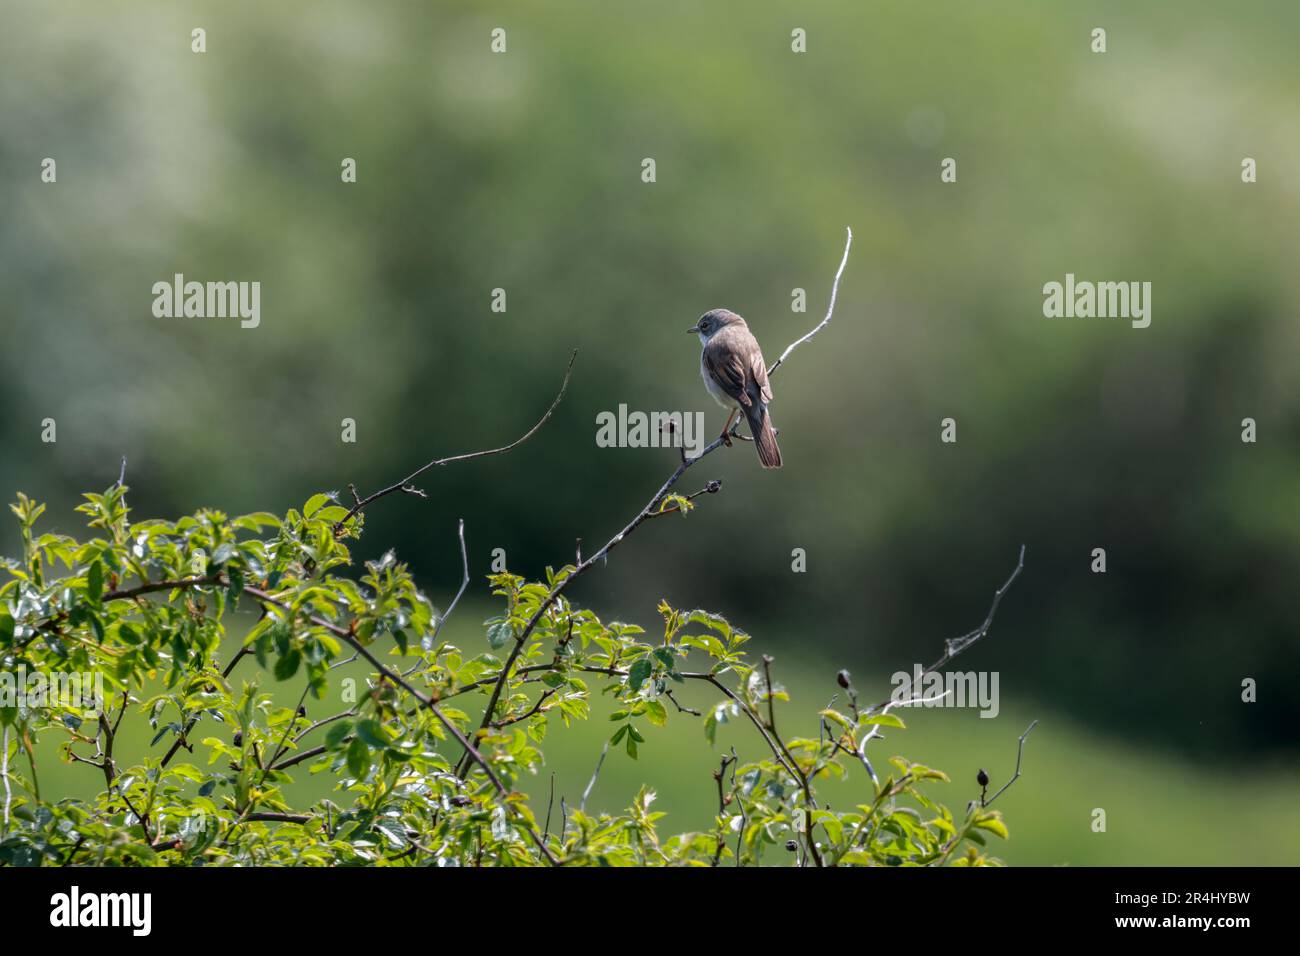 Whitethroat Silvia communis, male grey head white throat whitish buff underparts reddish brown on wings perched on long twig late spring season uk Stock Photo